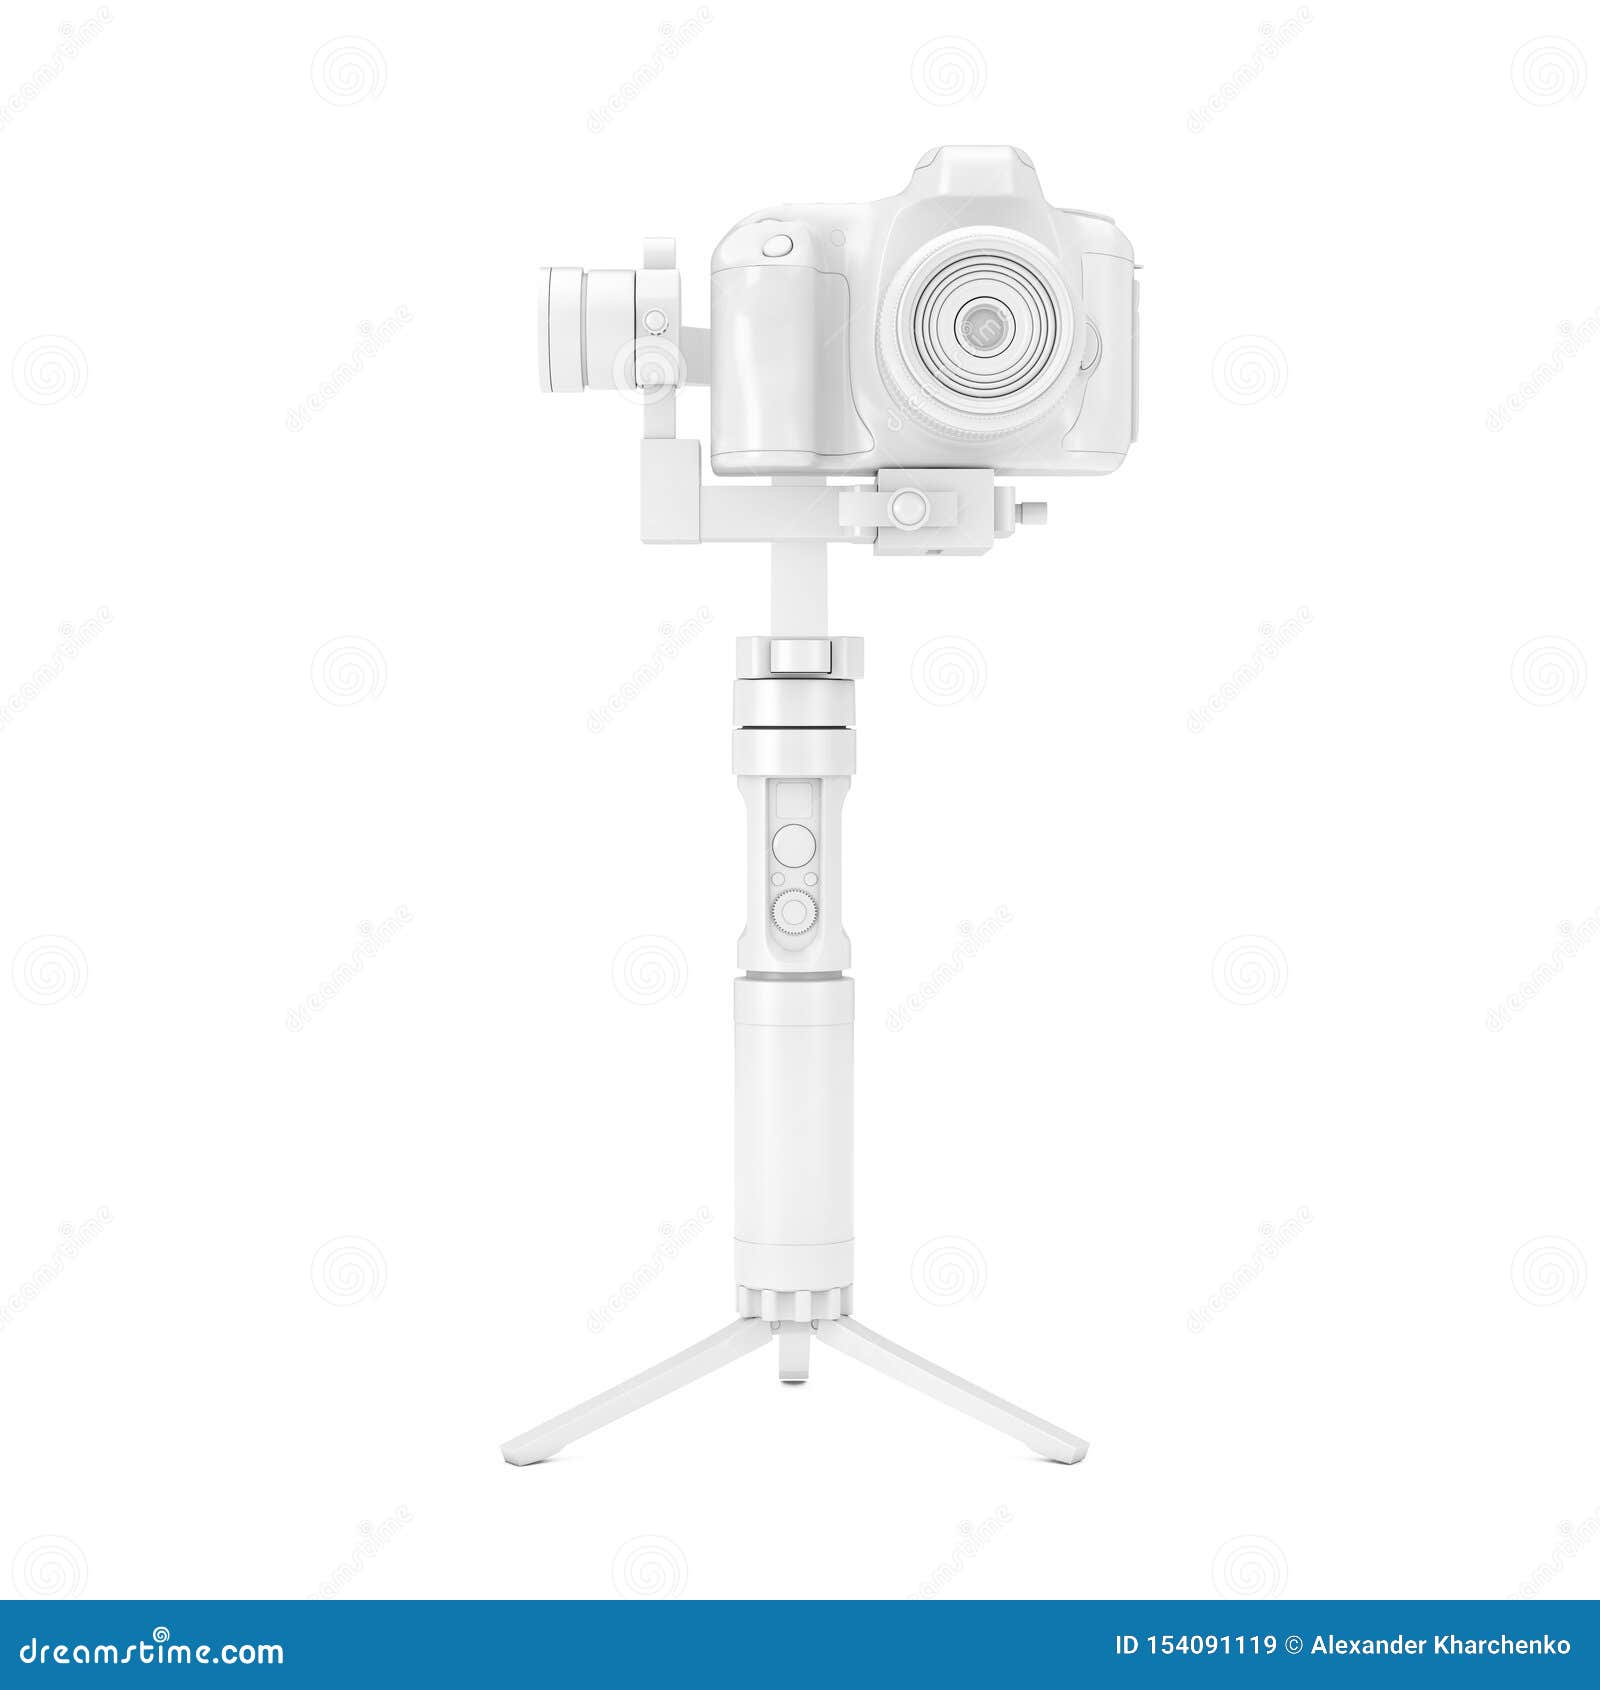 white dslr or video camera gimbal stabilization tripod system in clay style mock up. 3d rendering